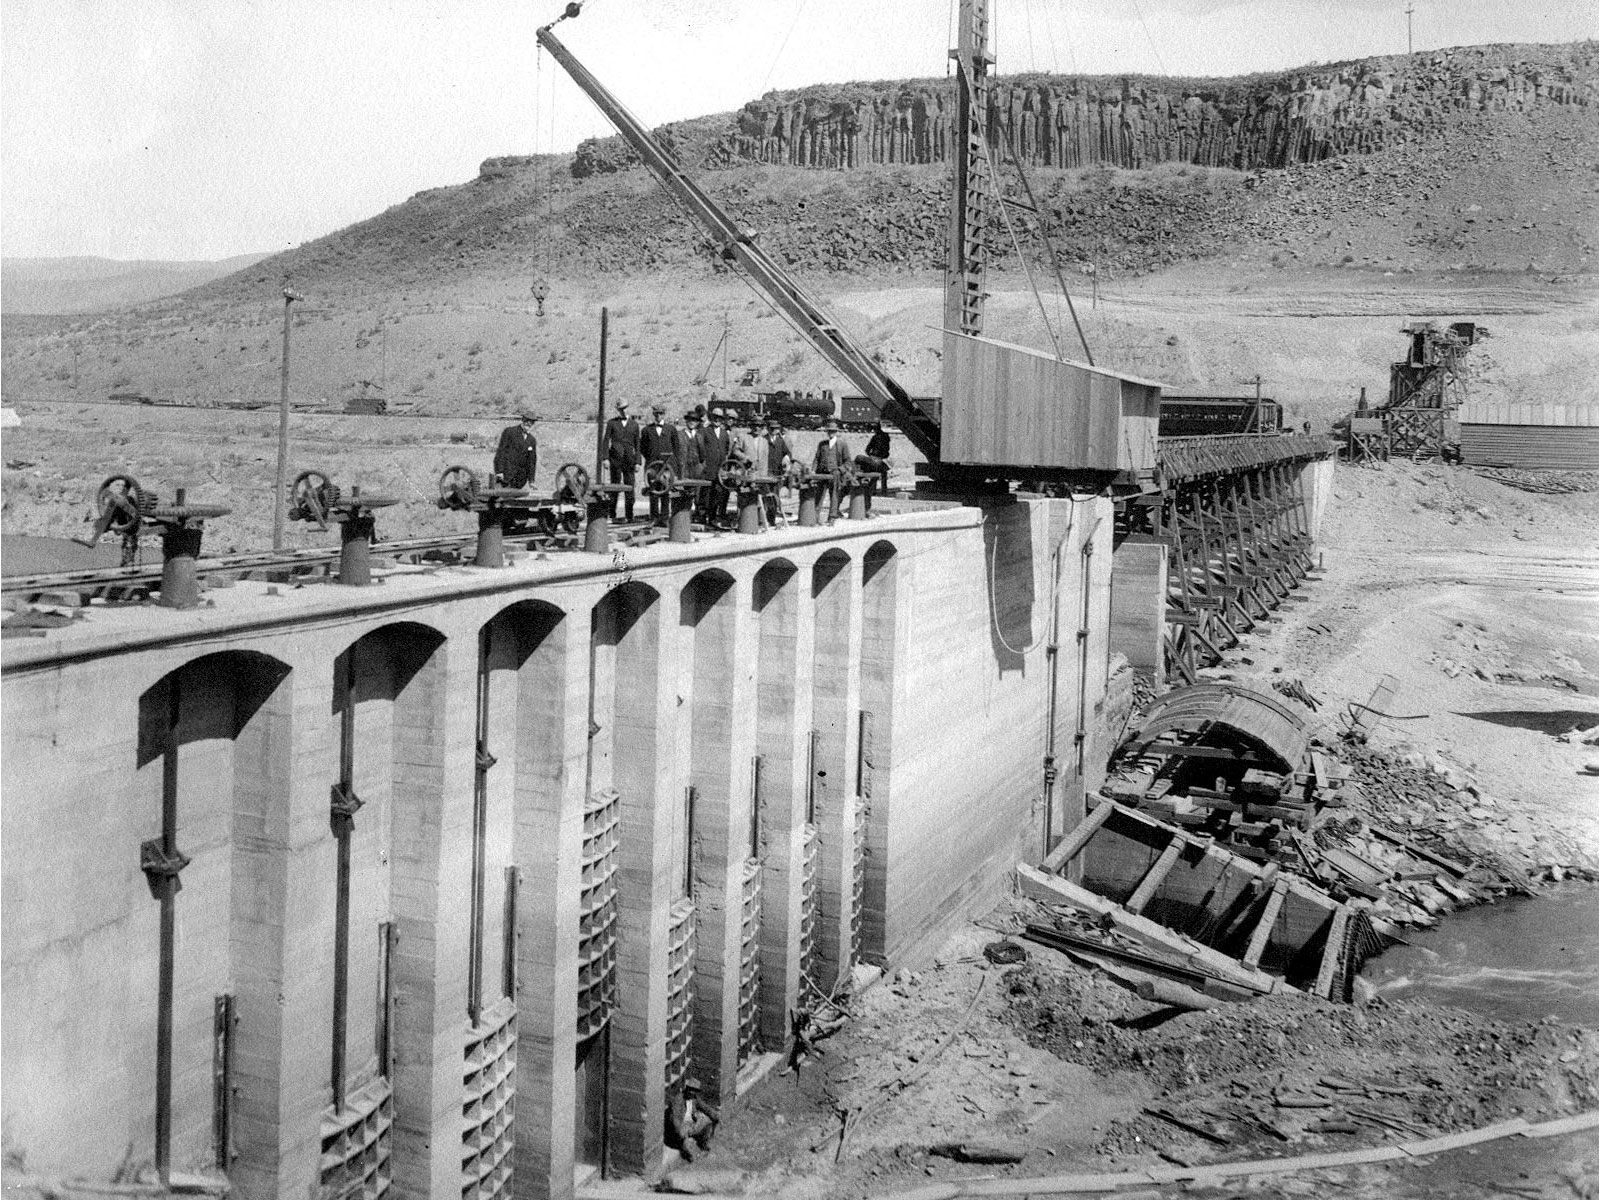 August 31, 1911. Beginning concrete work for the New York (Main) Canal near Boise, Idaho. 